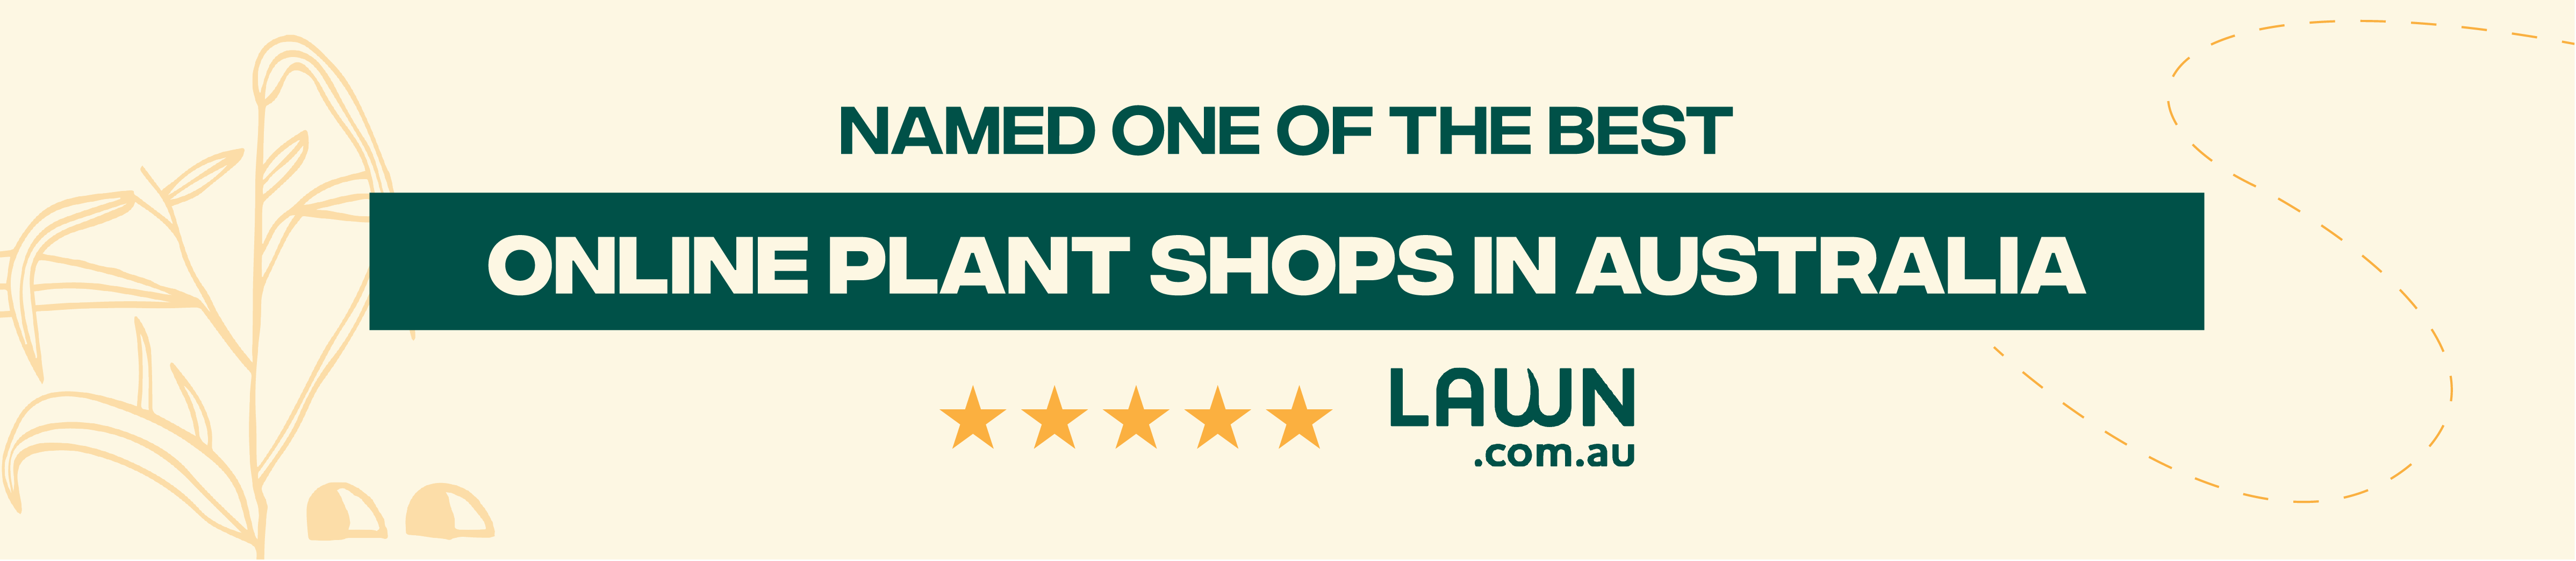 Named one of the best online plant shops in Australia by Lawn.com.au